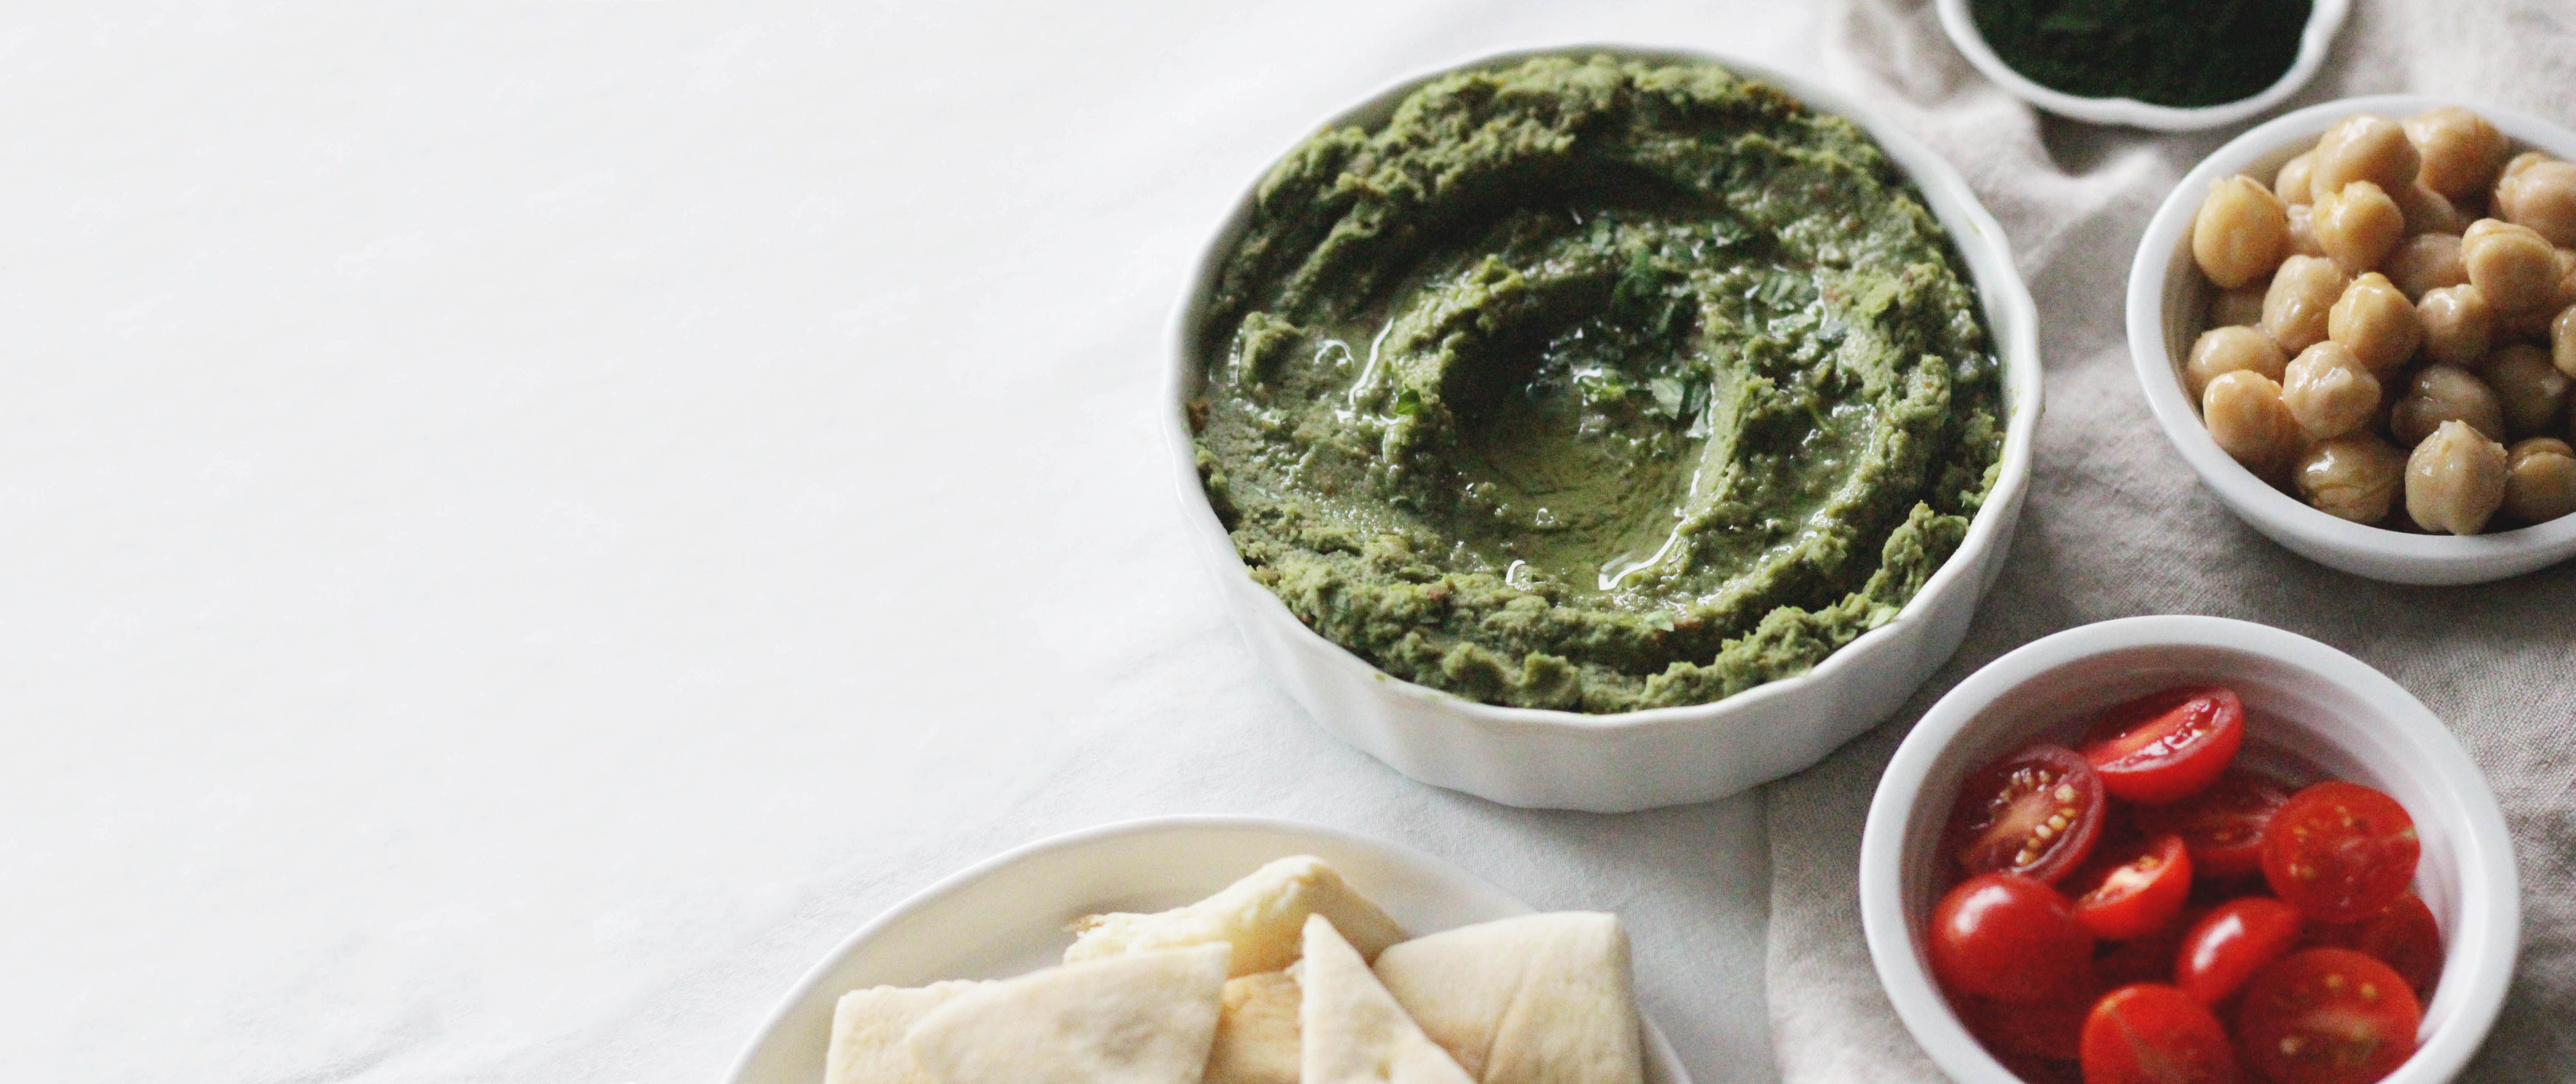 Hummus with chlorella is packed with protein and fiber to keep you feeling full.